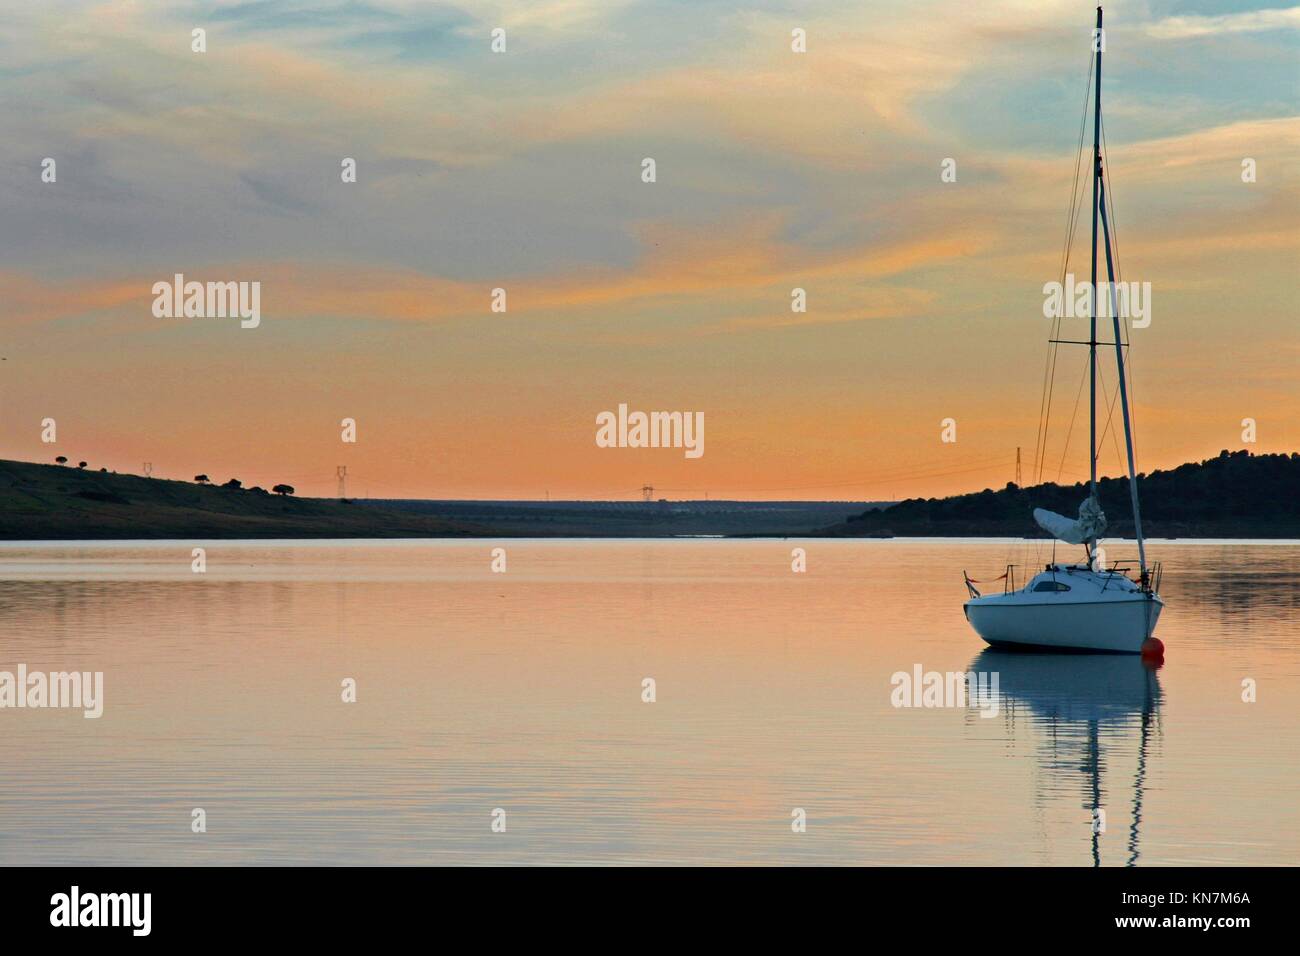 Sailboat anchored in the middle of Alange Reservoir, Spain. Sunset hour. Stock Photo